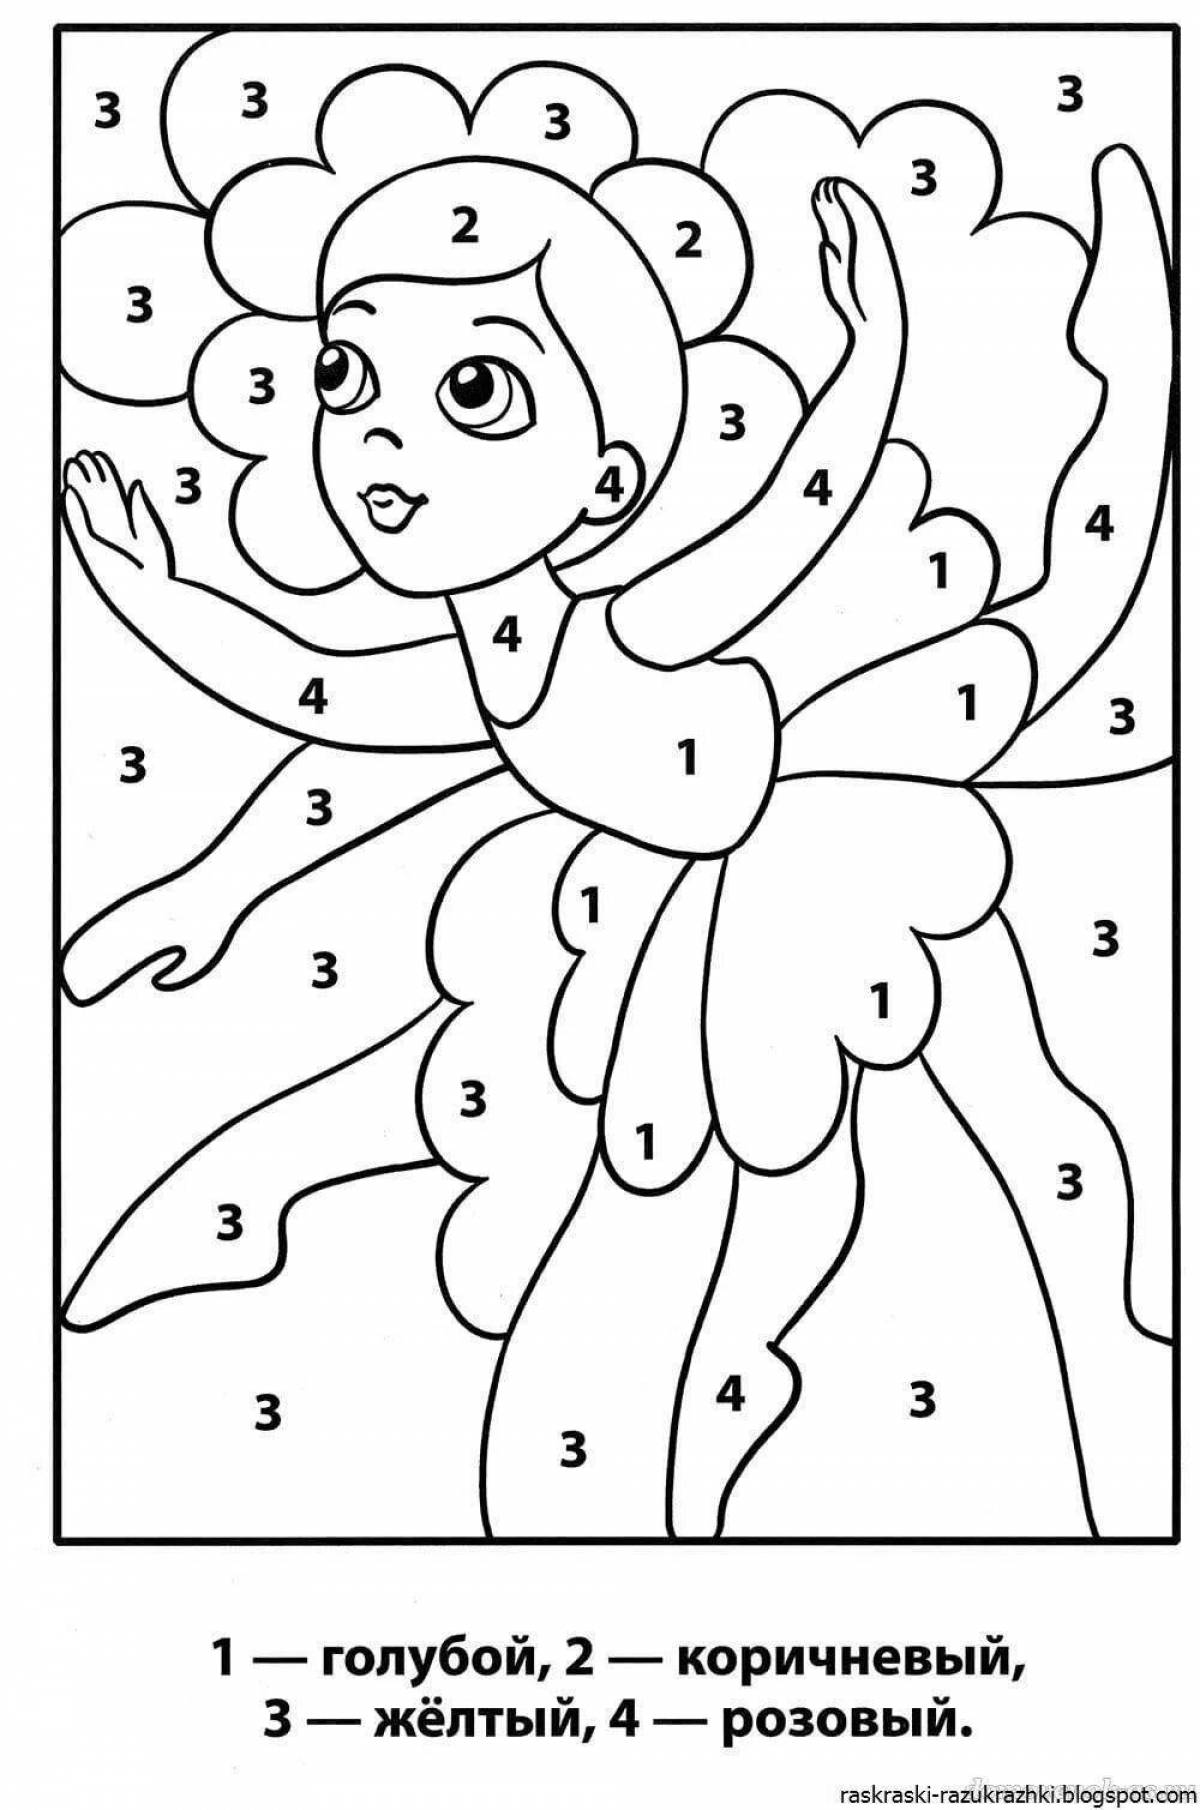 Crazy coloring pages for girls 5 years old